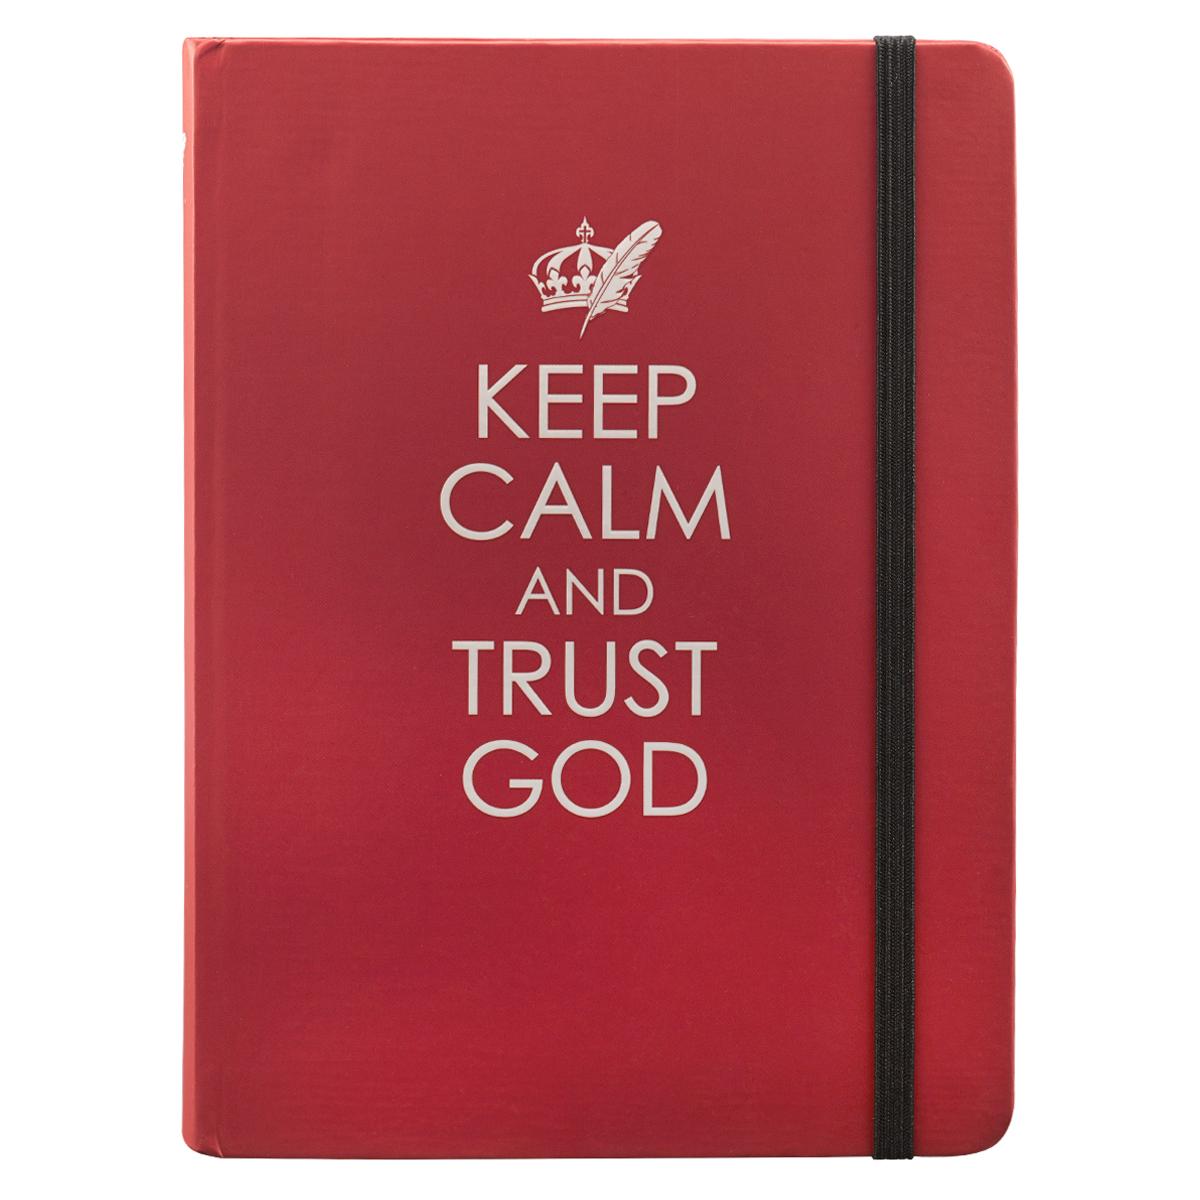 Image of Keep Calm and Trust God Journal- Red Hardcover other